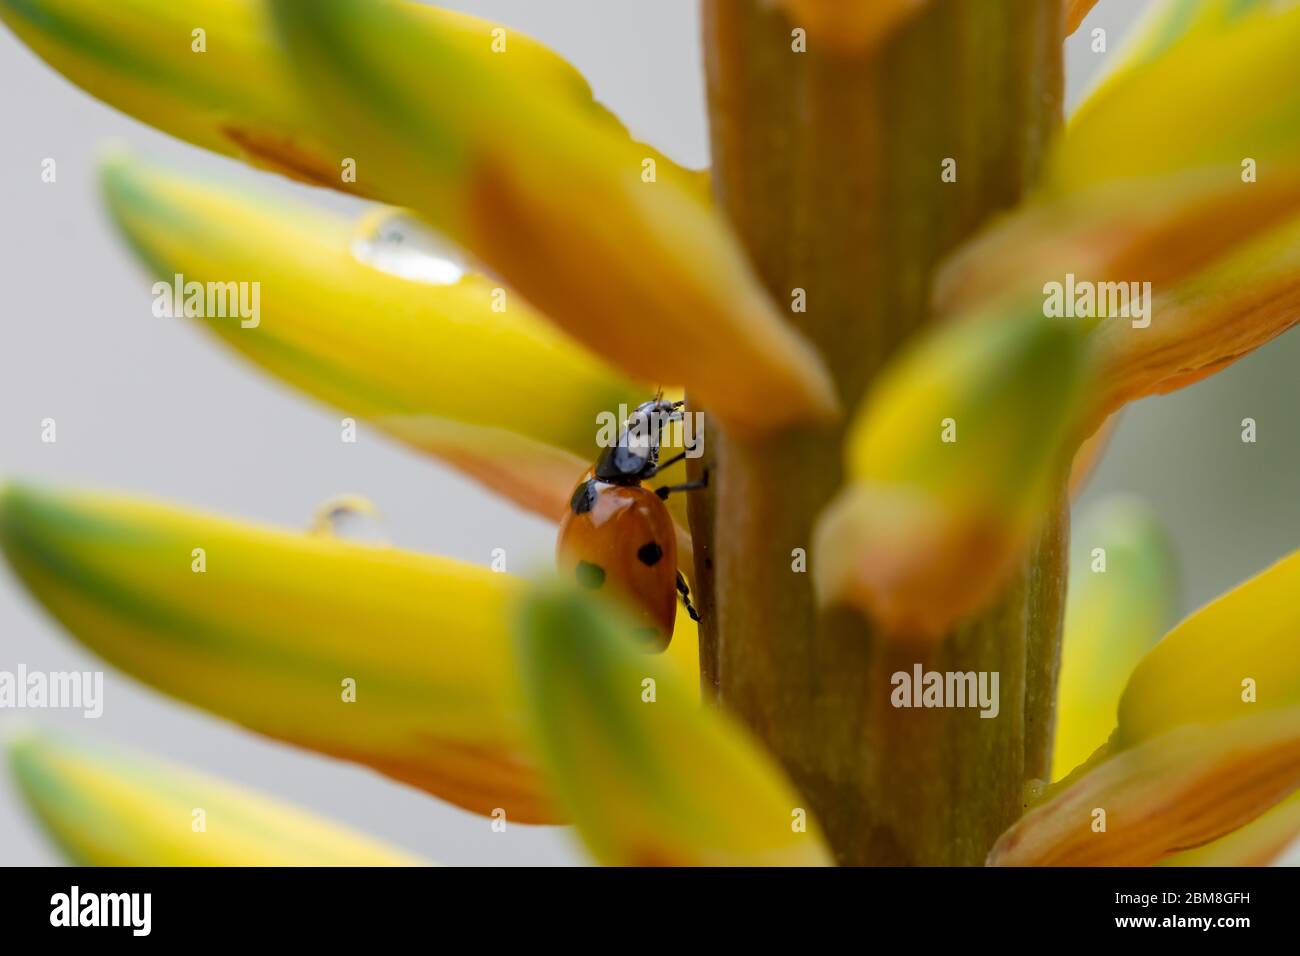 Detail of a ladybug walking among the petals of an aloe vera flower covered in raindrops Stock Photo